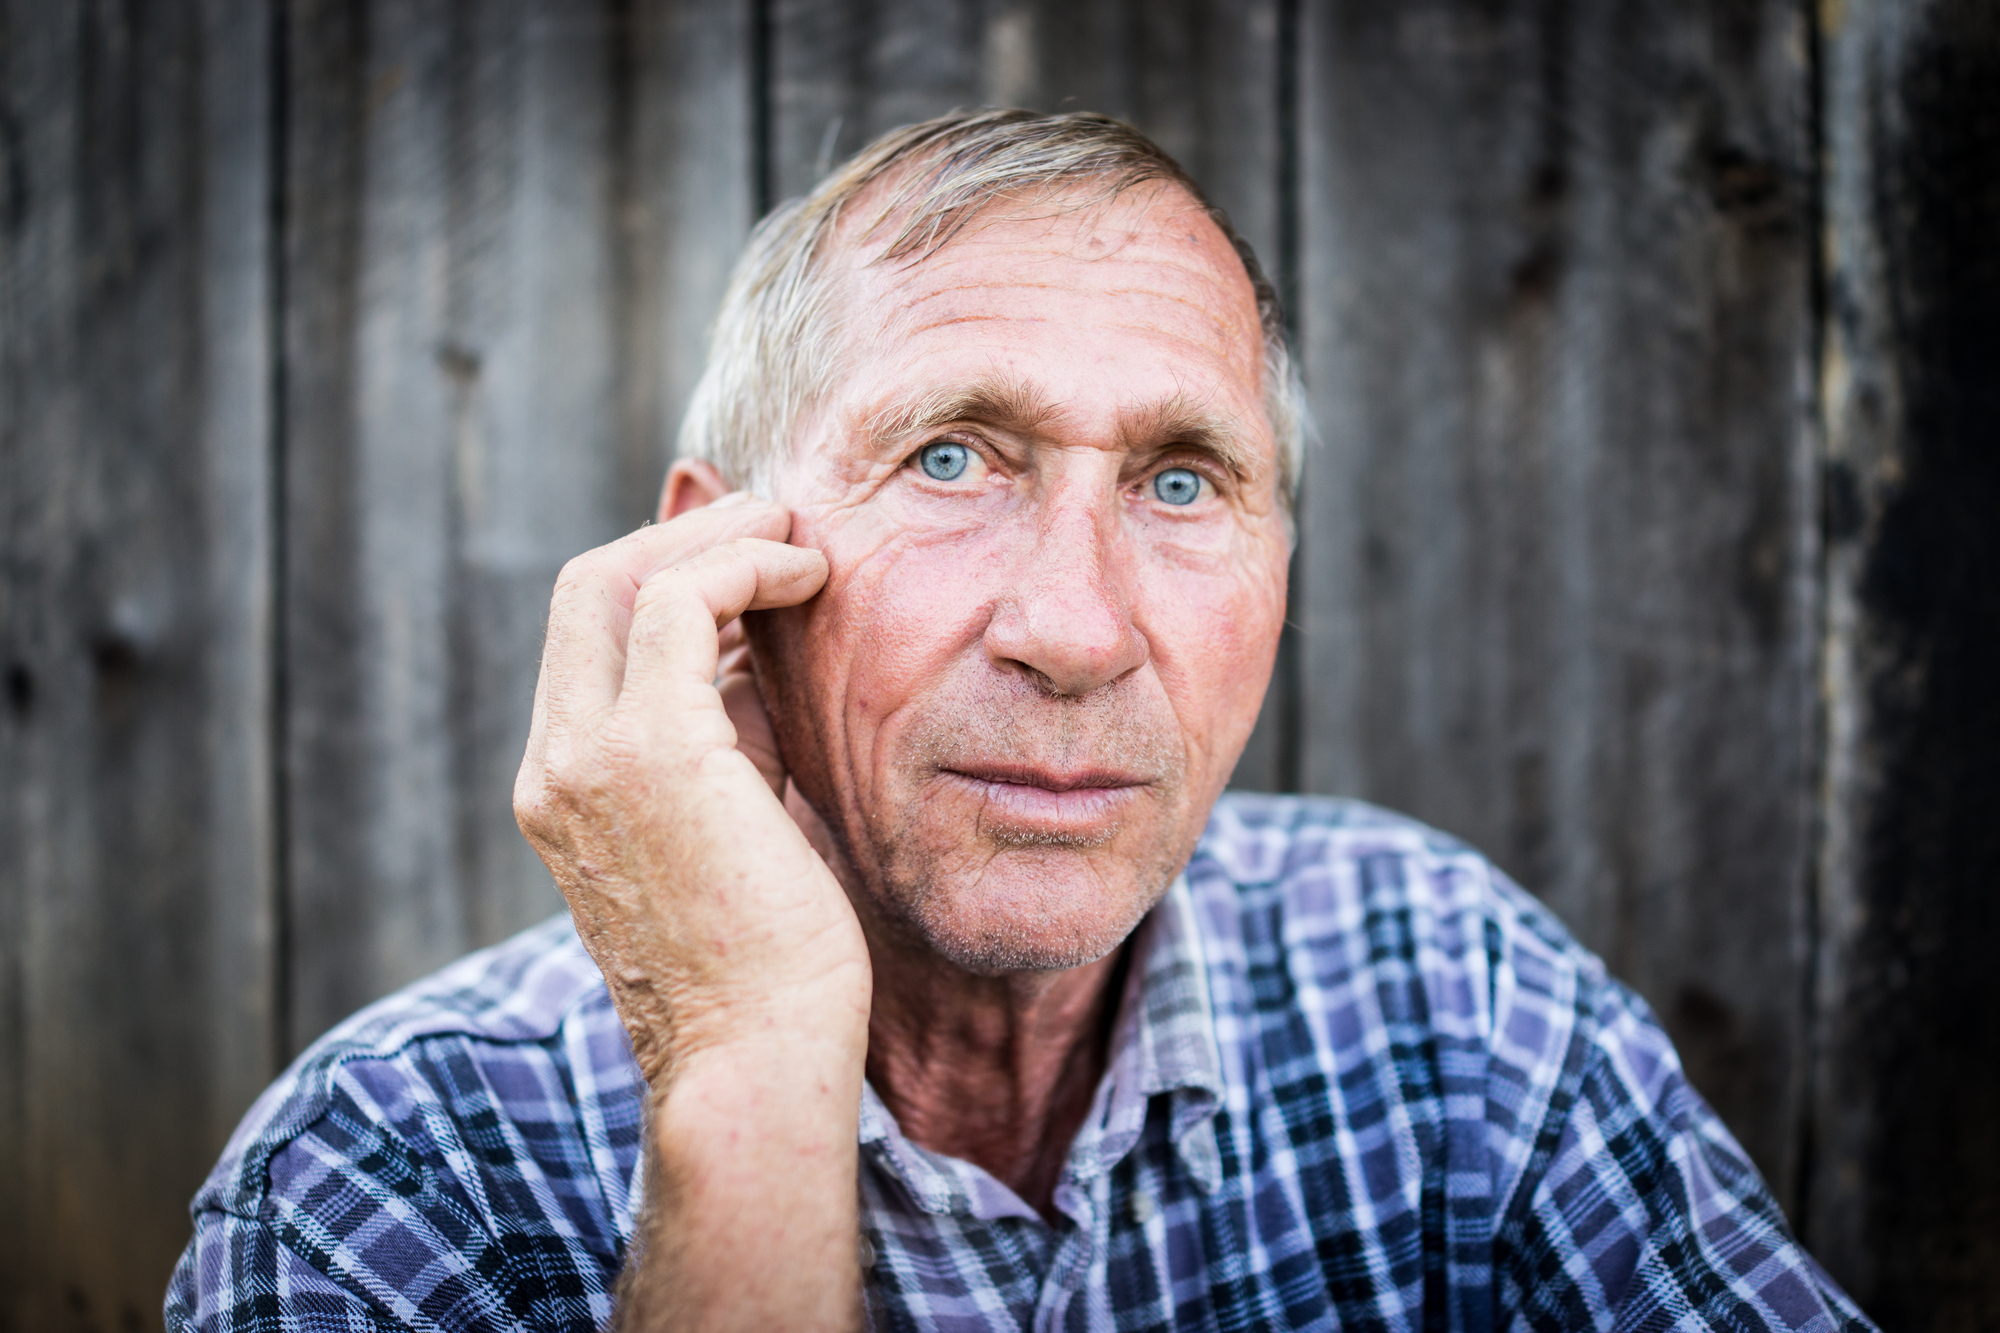 An elderly man with short gray hair and blue eyes, wearing a plaid shirt, looks directly at the camera. He holds his right hand to the side of his face near his eye. The background is a weathered wooden fence.